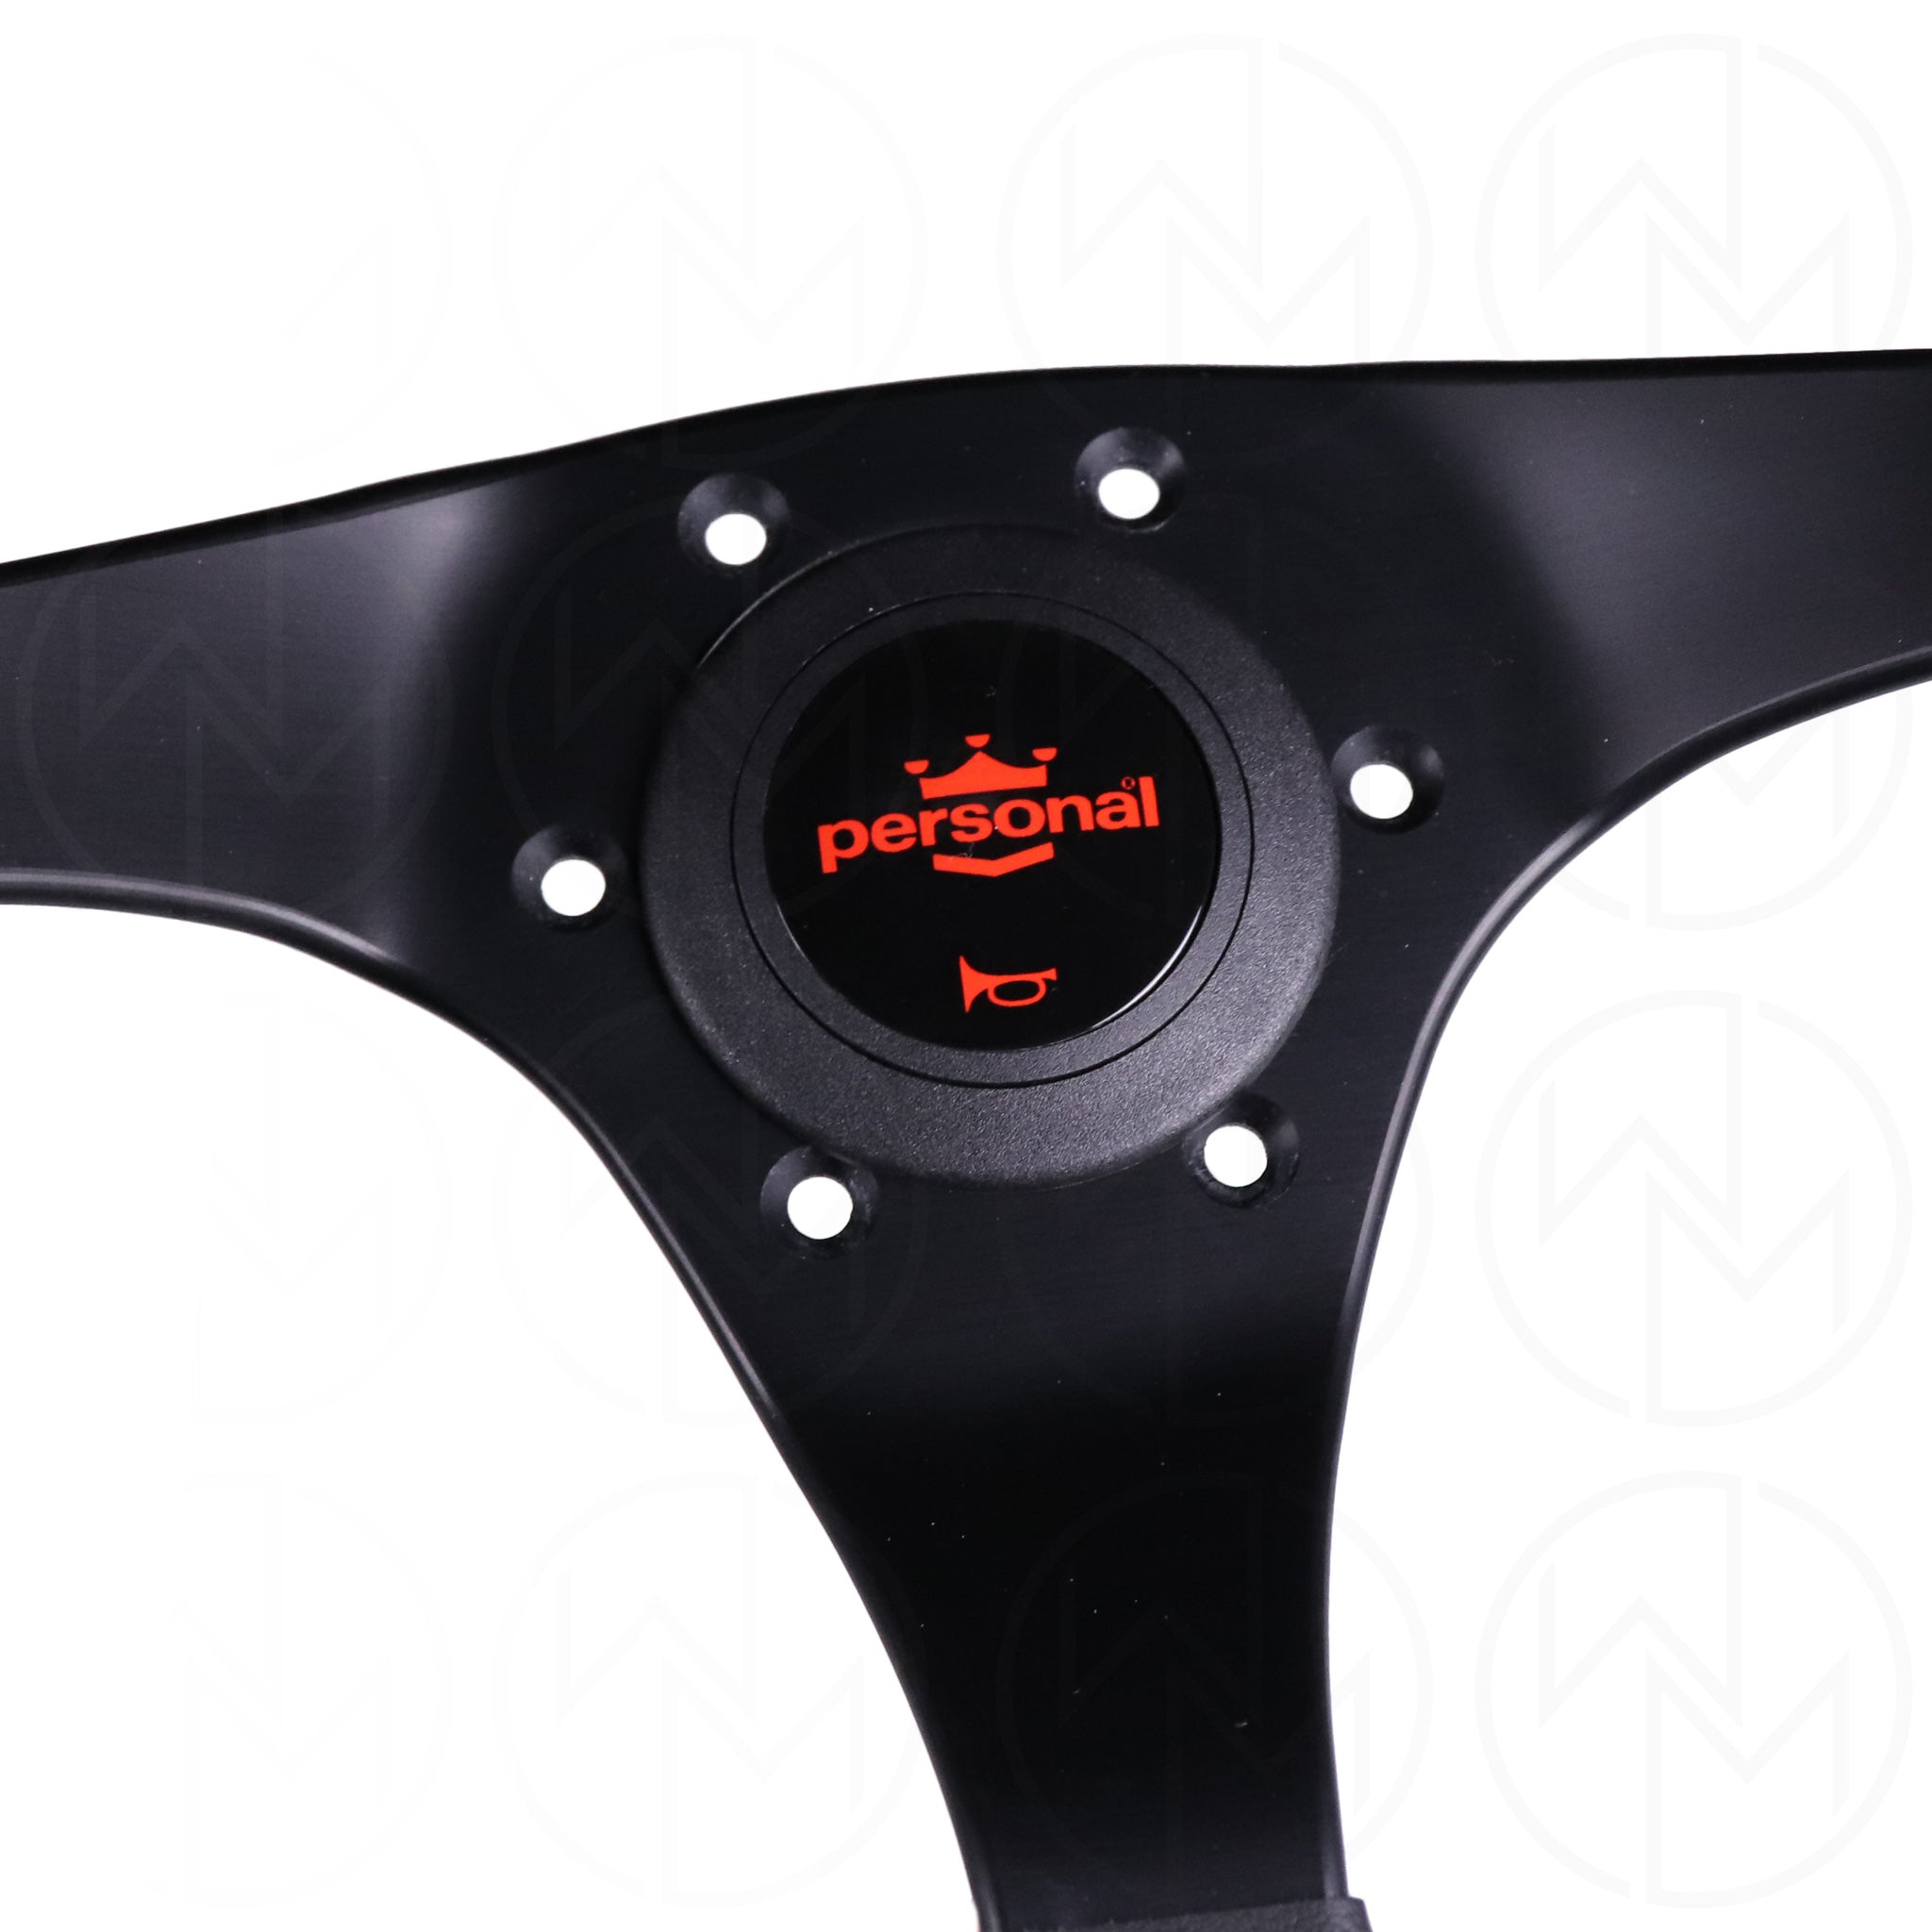 Personal Trophy Steering Wheel - 350mm Leather w/Red Stitch